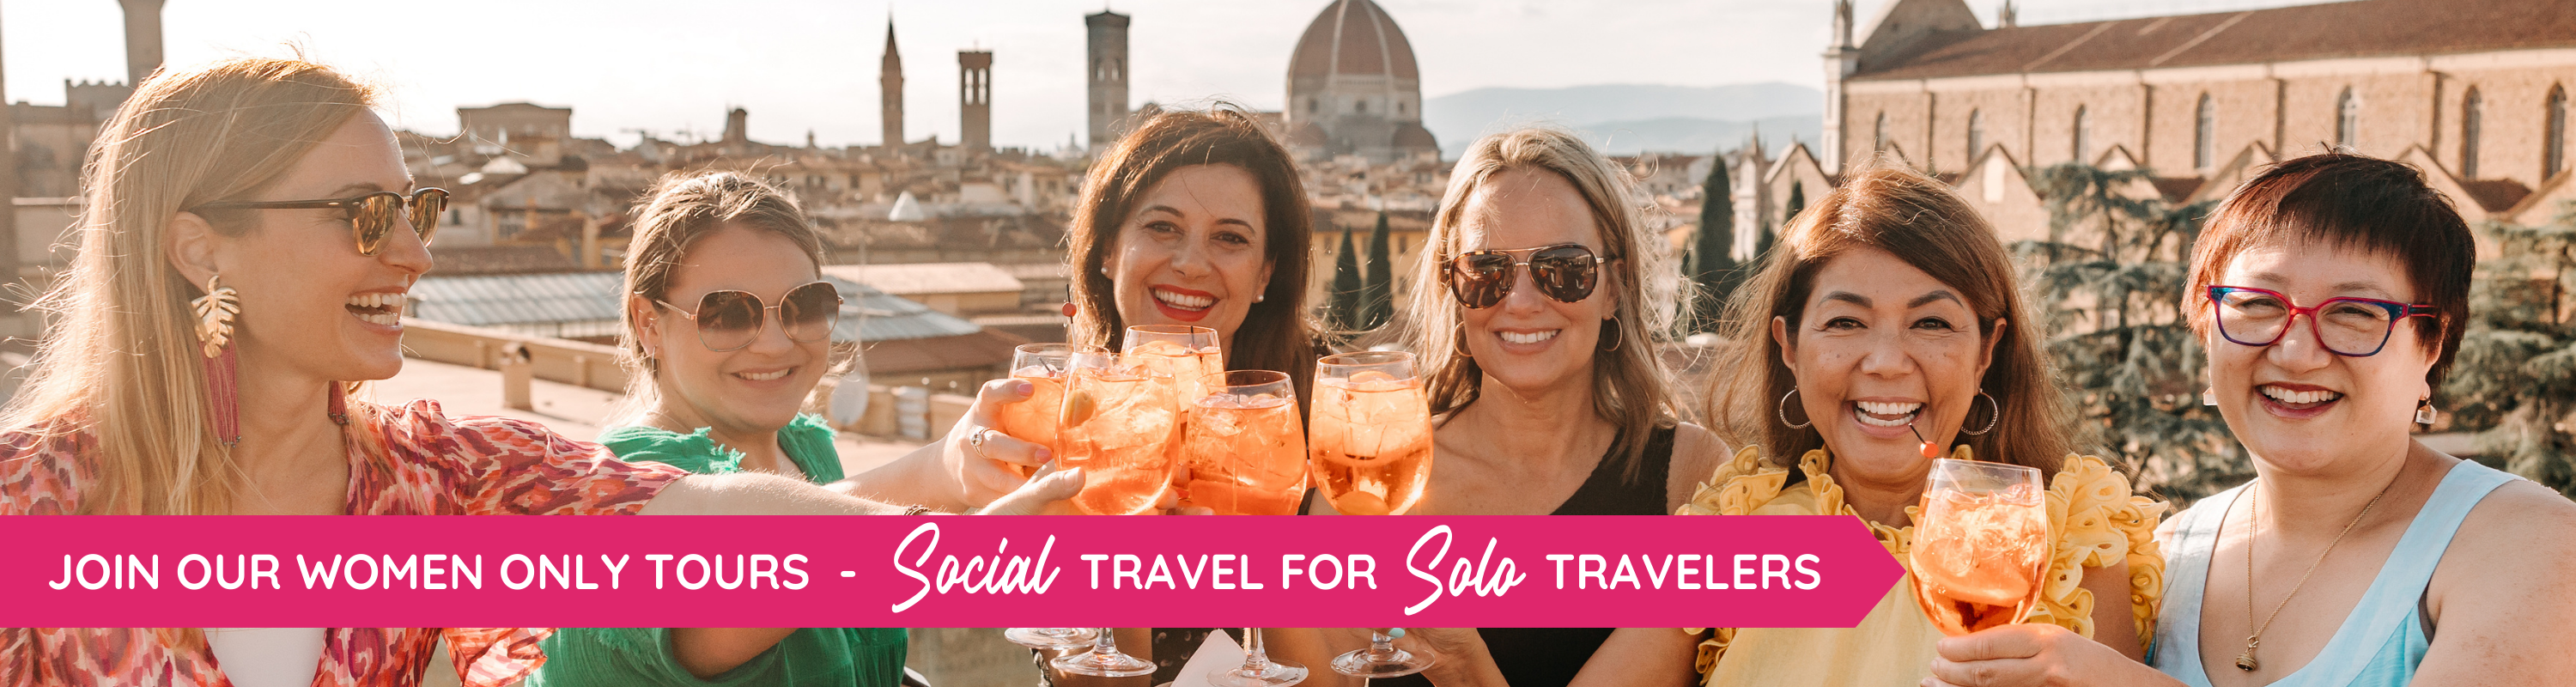 https://www.solofemaletravelers.club/wp-content/uploads/2022/05/Join-our-WOMEN-only-tours-1500-%C3%97-400-px-3.png